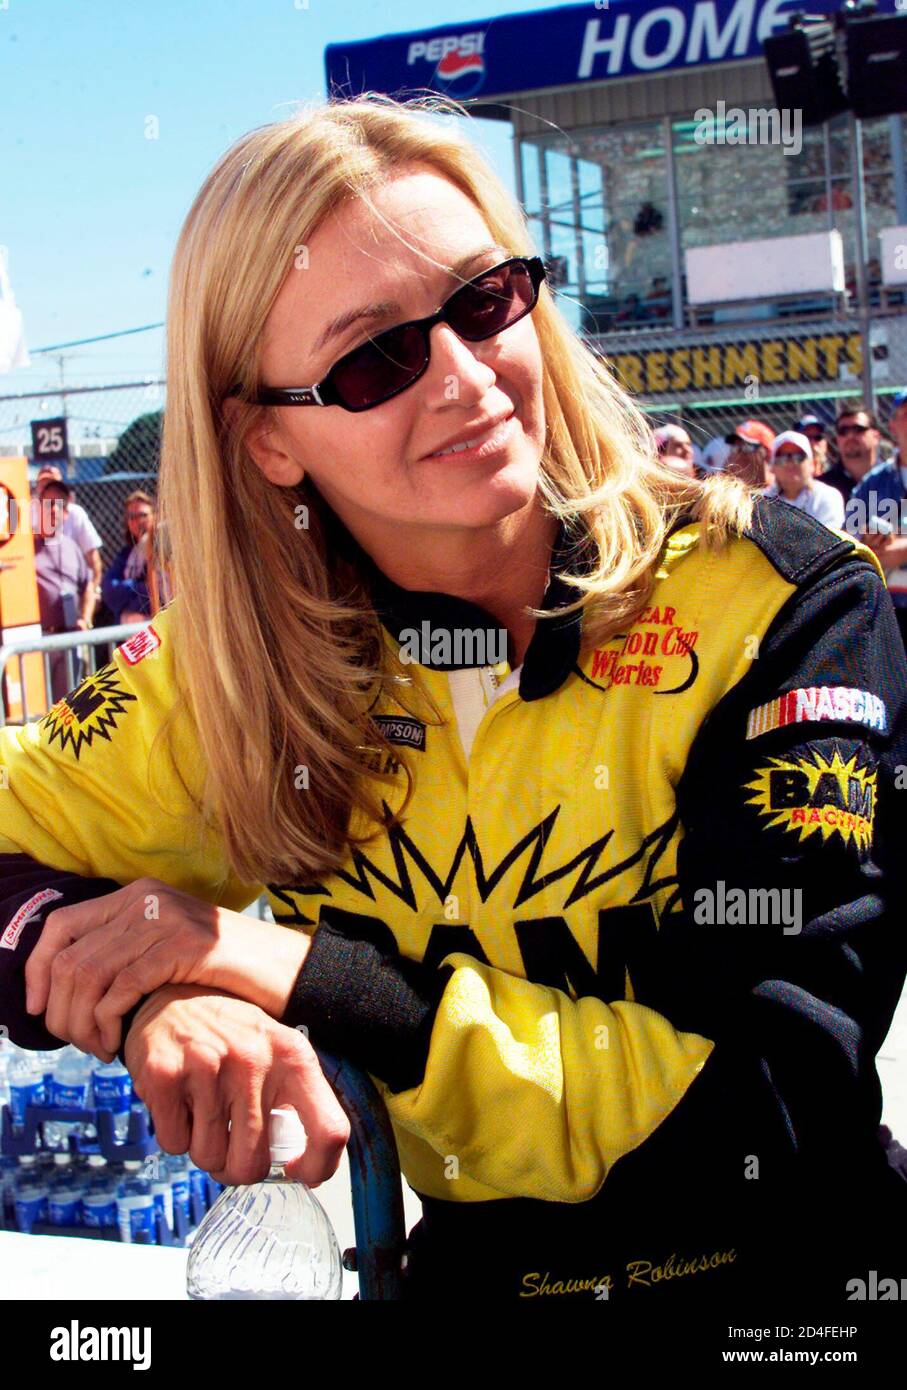 Driver Shawna Robinson of Des Moine, Iowa, relaxes before driver introductions before the running of the 44th annual Daytona 500 at the Daytona International Speedway February 17, 2002 in Daytona Beach, Florida. Robinson becomes the second woman to drive in the race. REUTERS/Mark Wallheiser  JLS Stock Photo